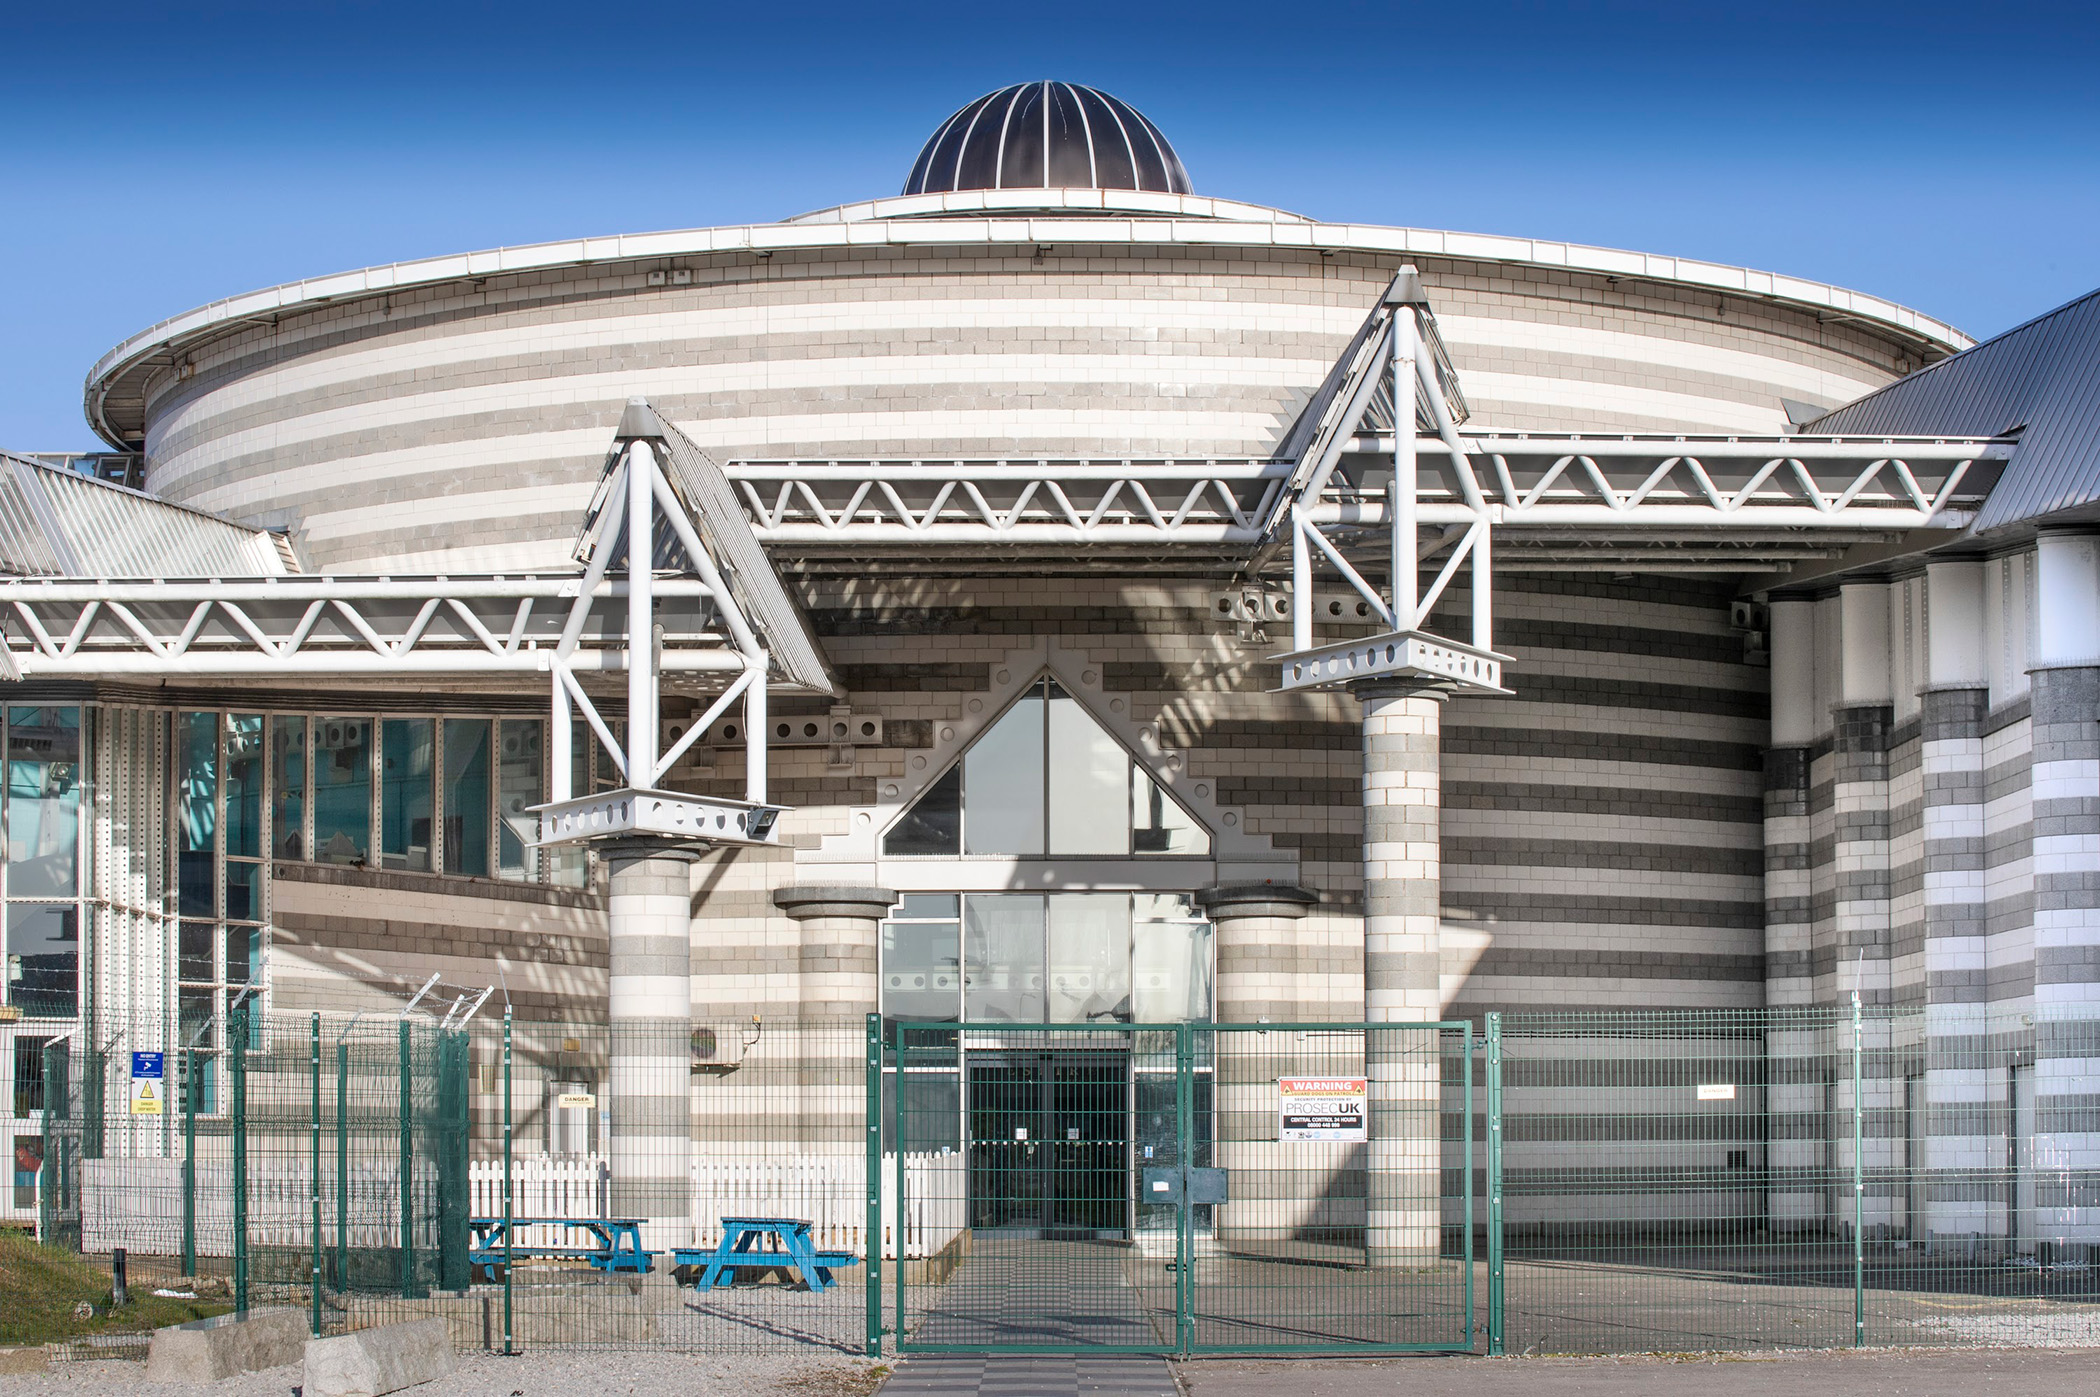 Exterior view of a leisure centre with a large domed roof structure